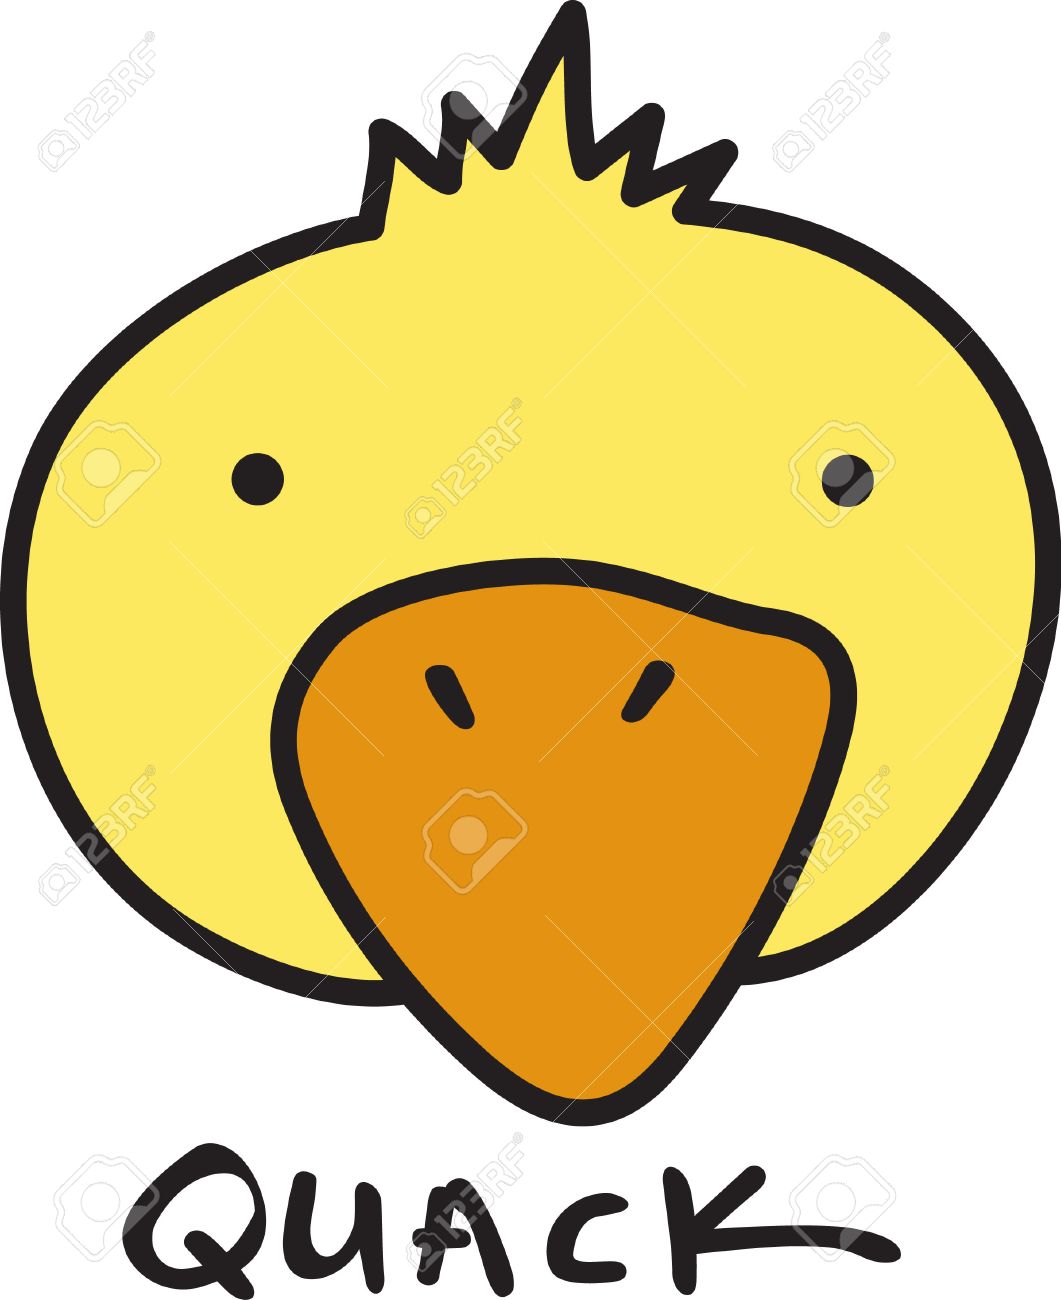 40710599-quack-quack-qwazy-qwackers-a-much-loved-classic-duck-head-design-for-your-projects-great-for-kids-an.jpg